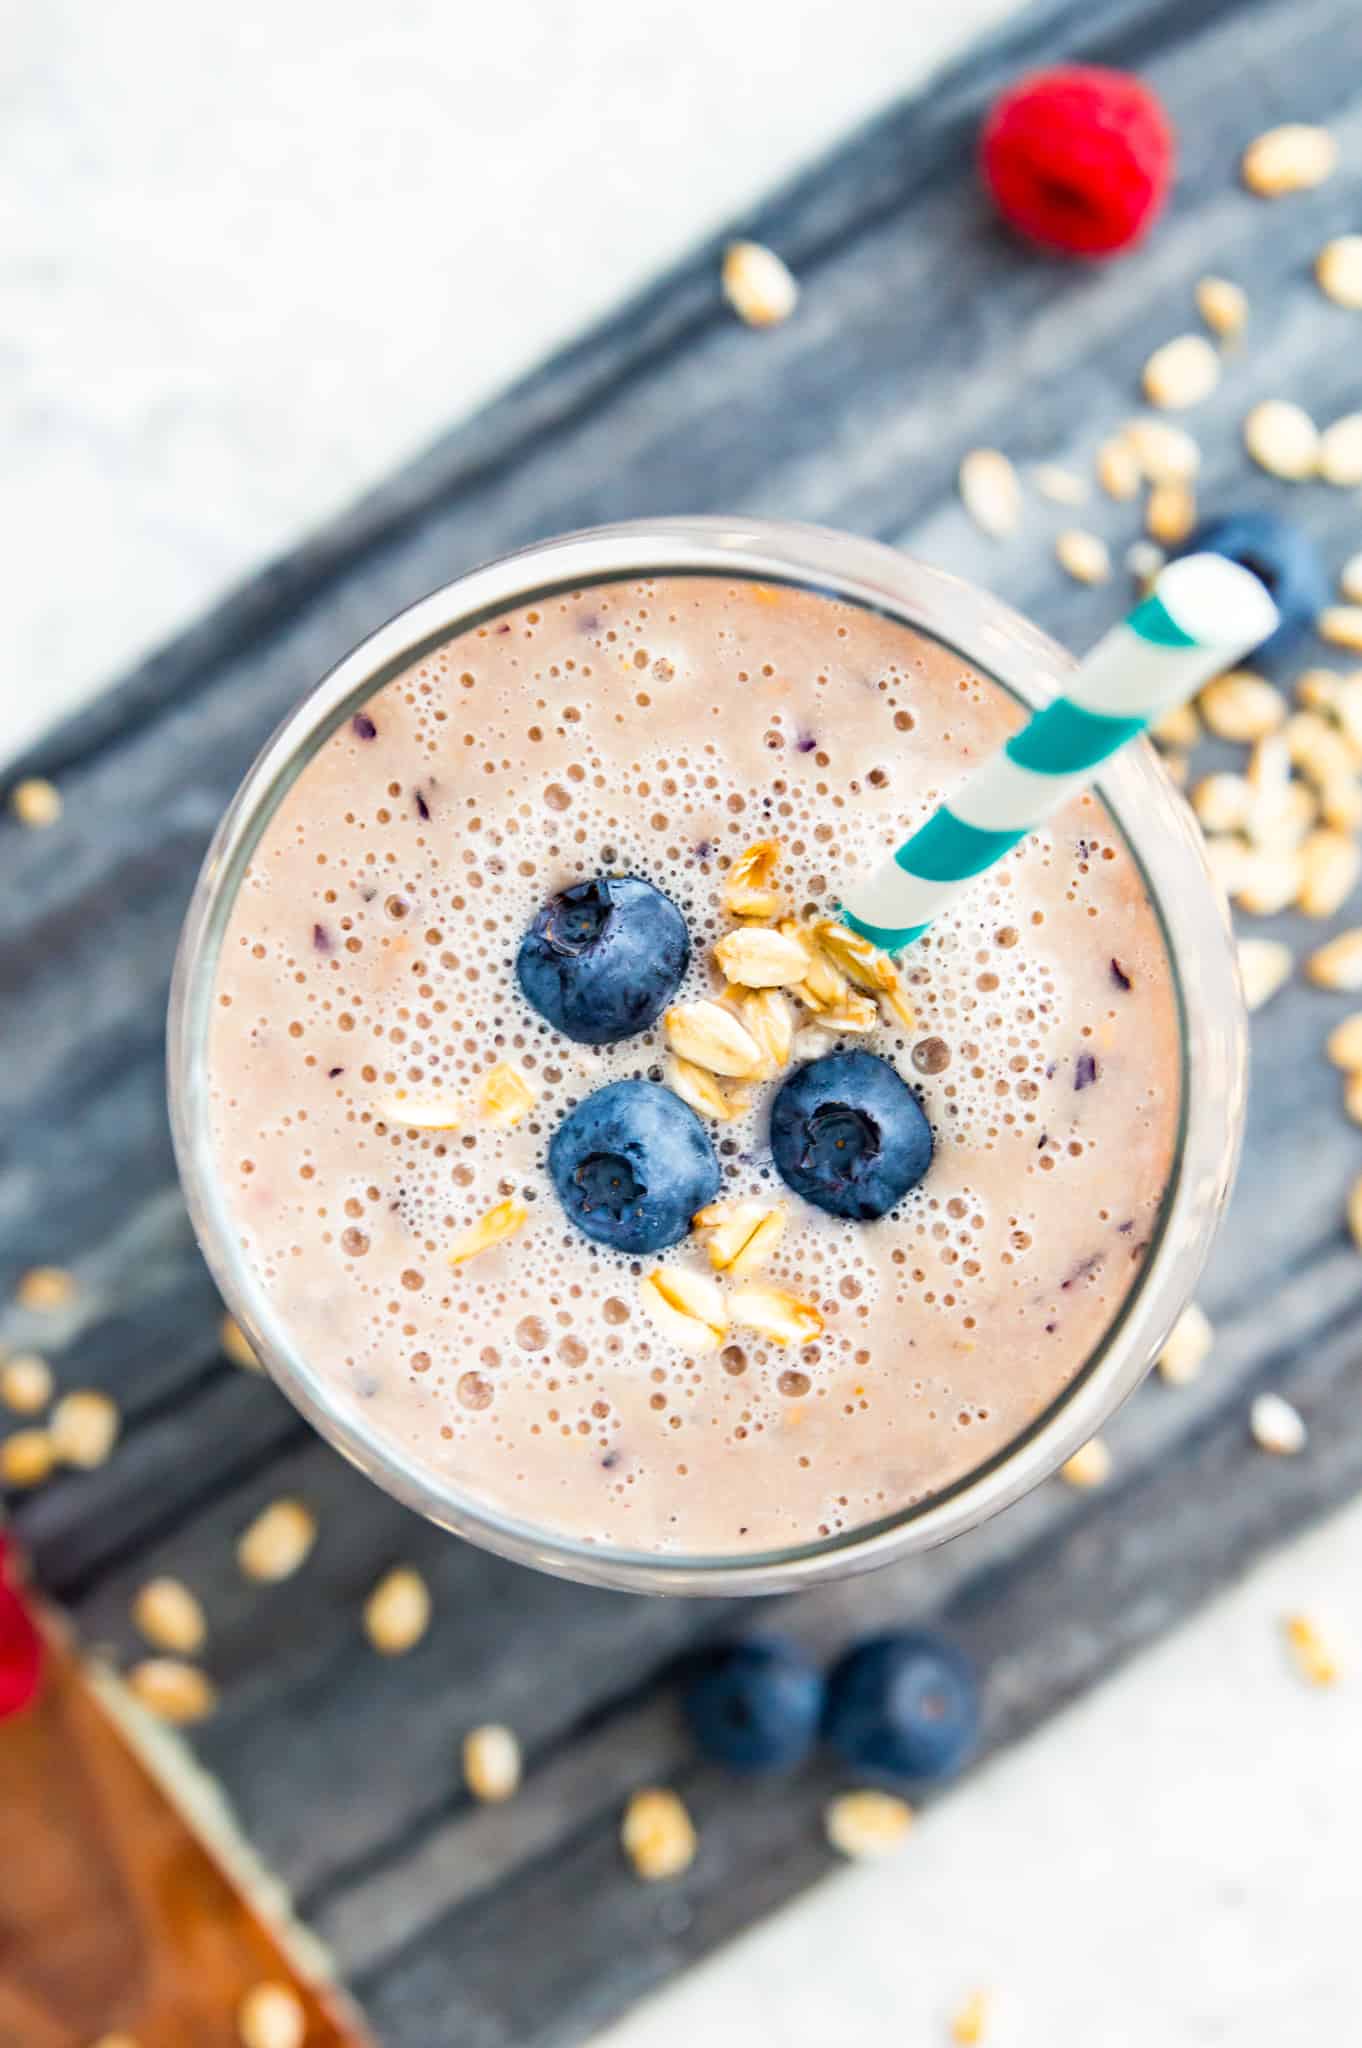 A glass full of an oat milk smoothie topped with fresh blueberries.